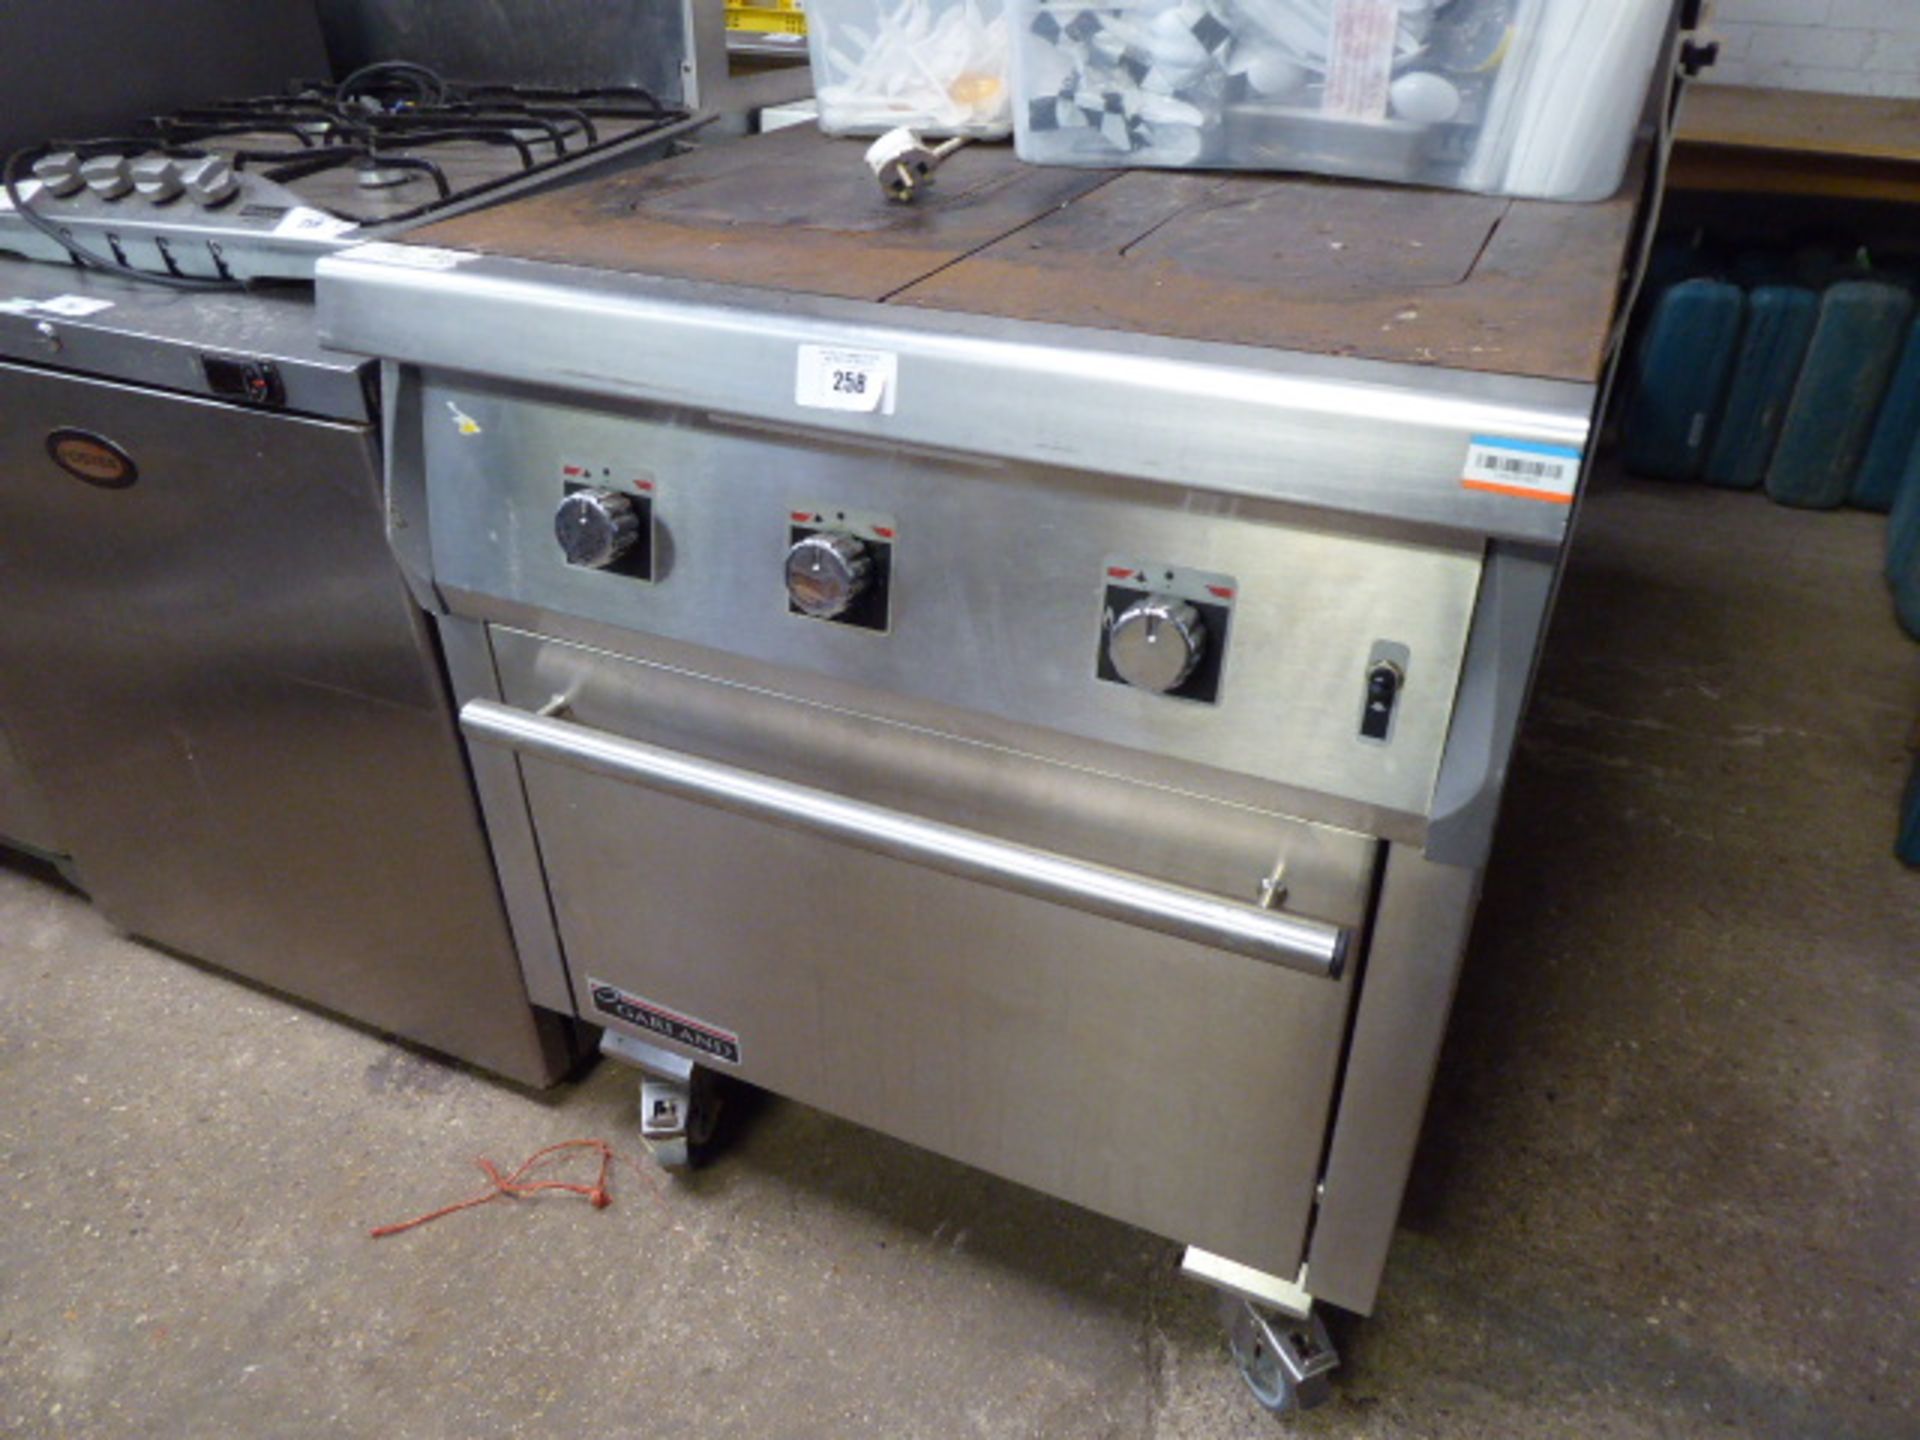 (76) 80cm gas Garland solid top cooker with 2 burners and large single door oven under on castors,